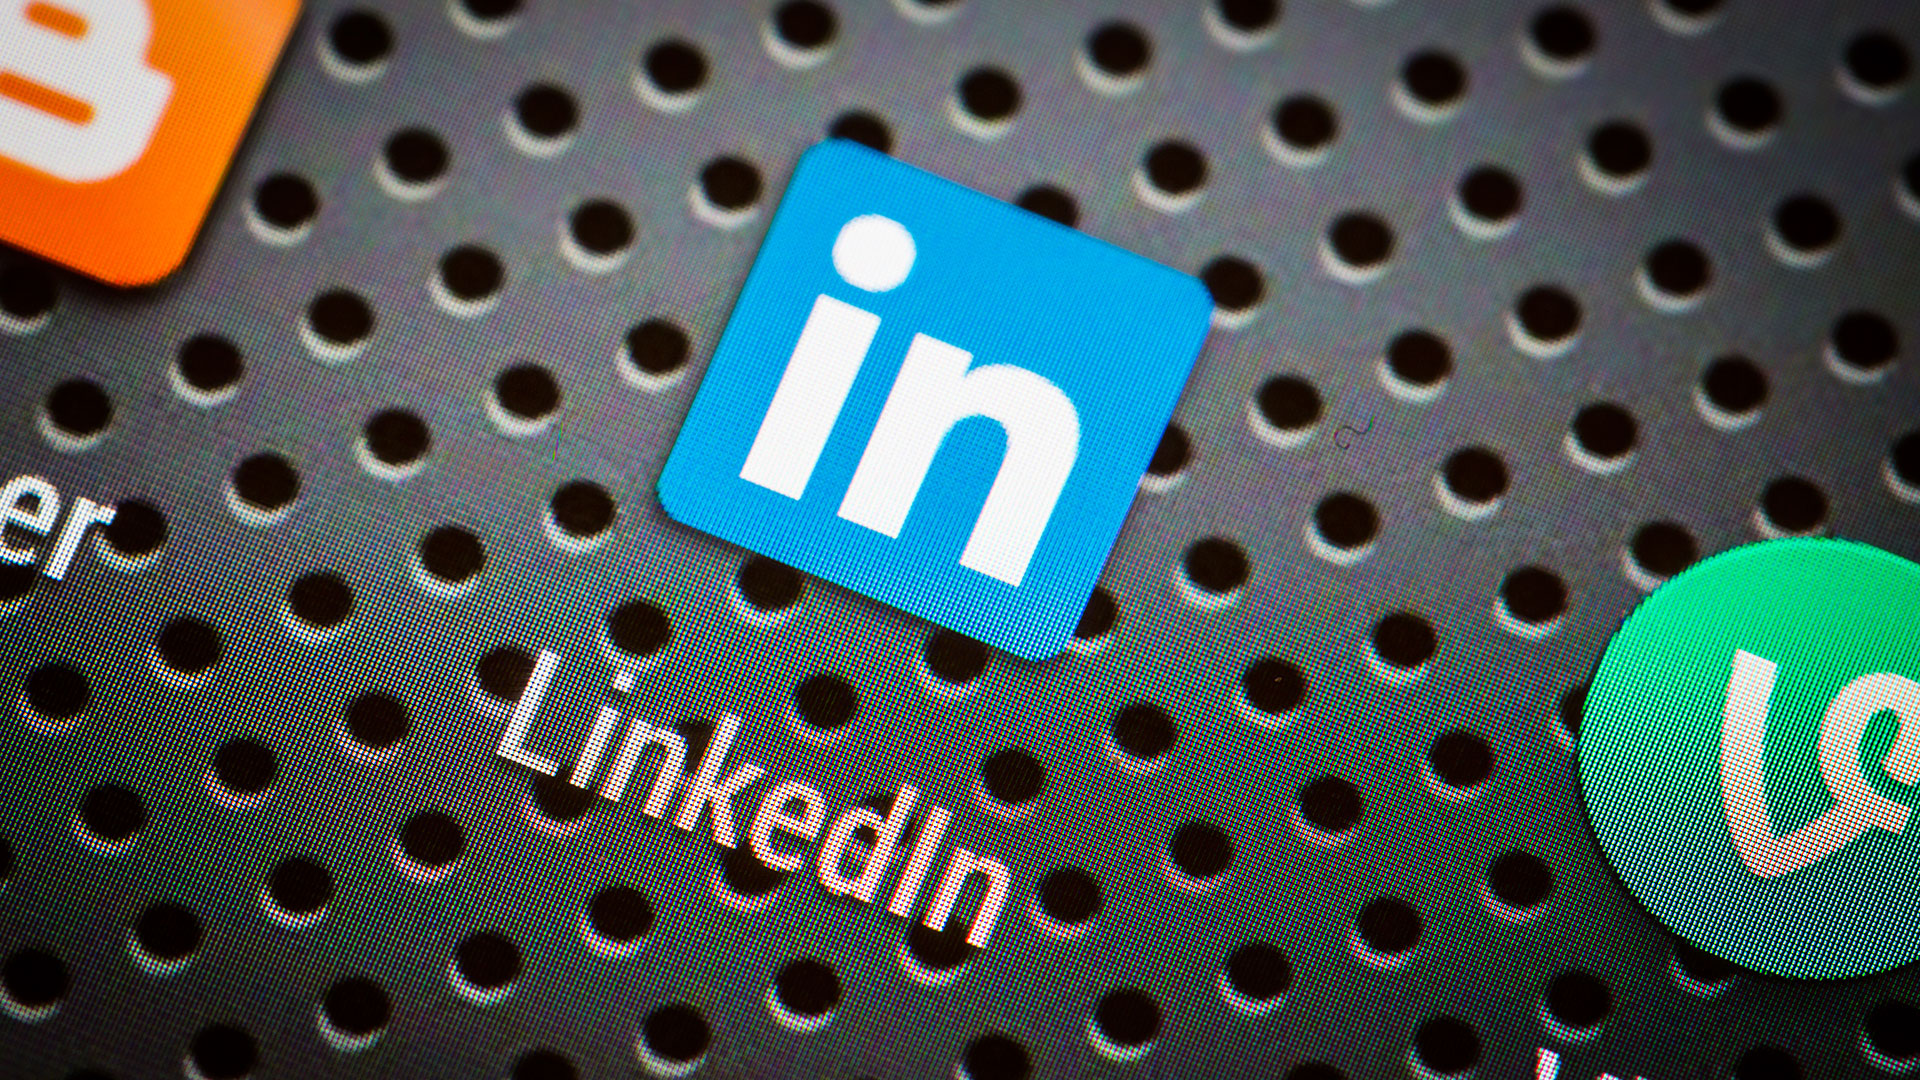 LinkedIn’s new conversion tracking will break down purchases, sign-ups by audience segment